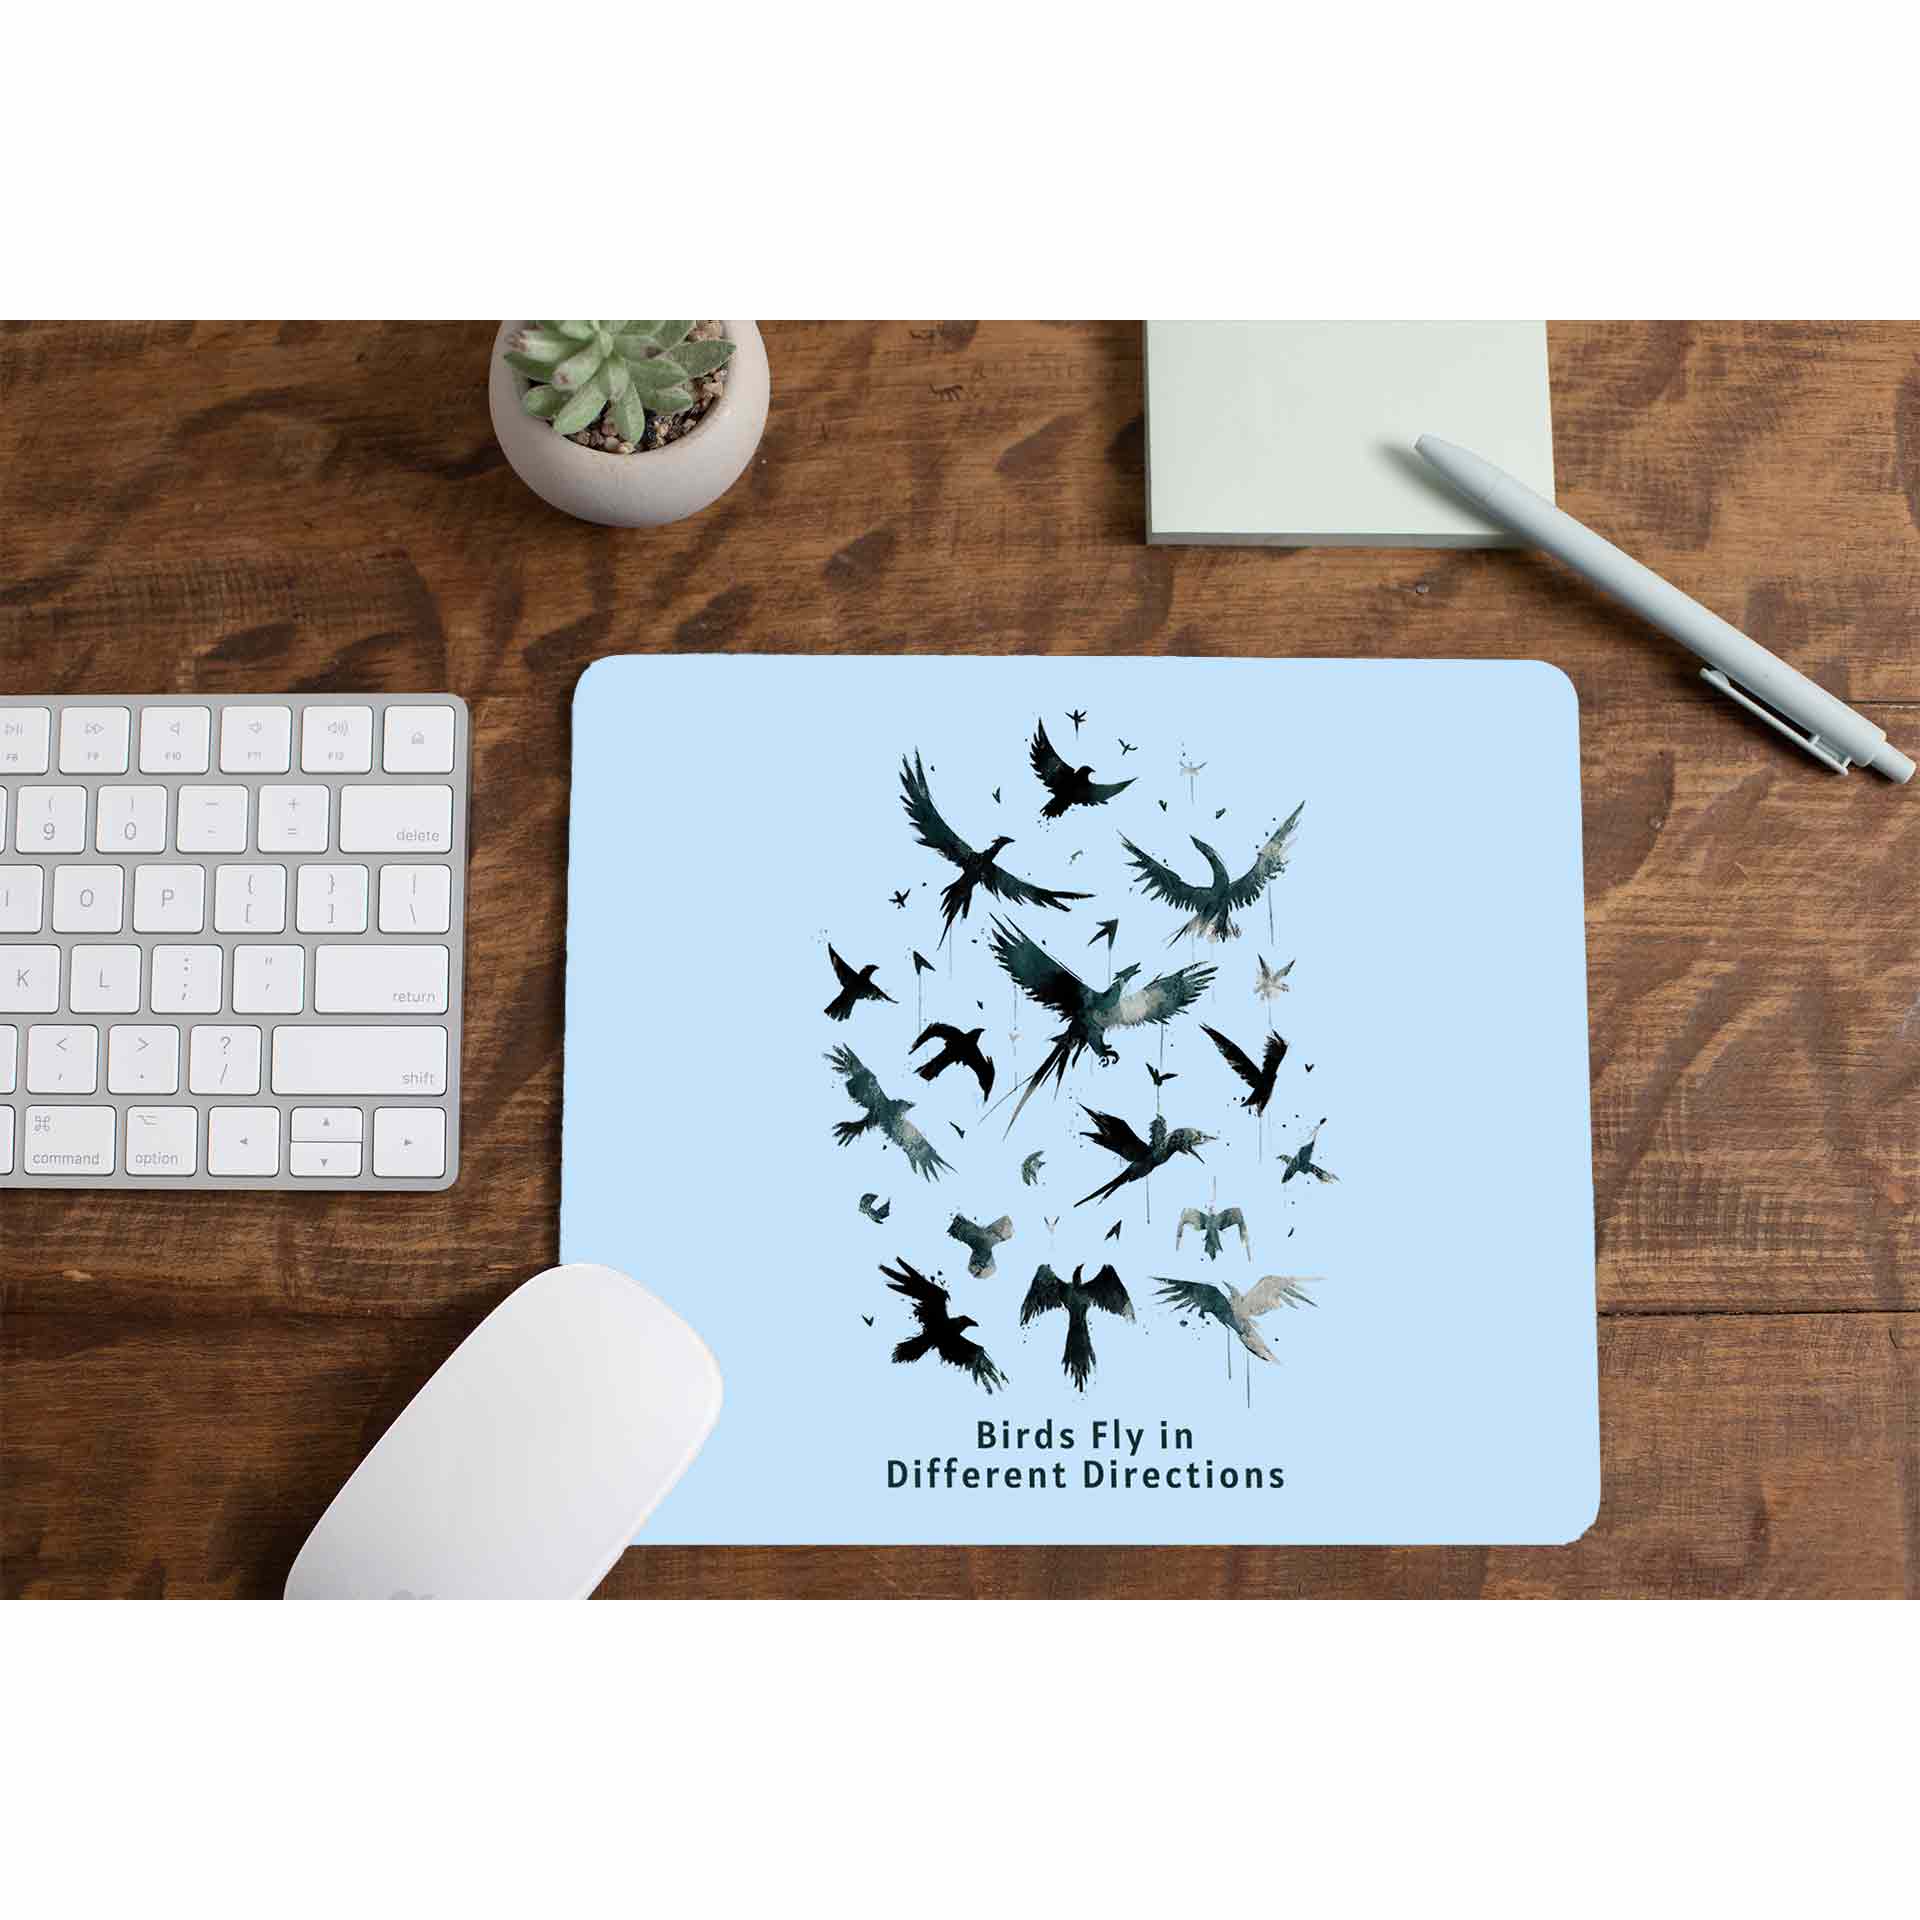 imagine dragons birds fly in different directions mousepad logitech large music band buy online united states of america usa the banyan tee tbt men women girls boys unisex  